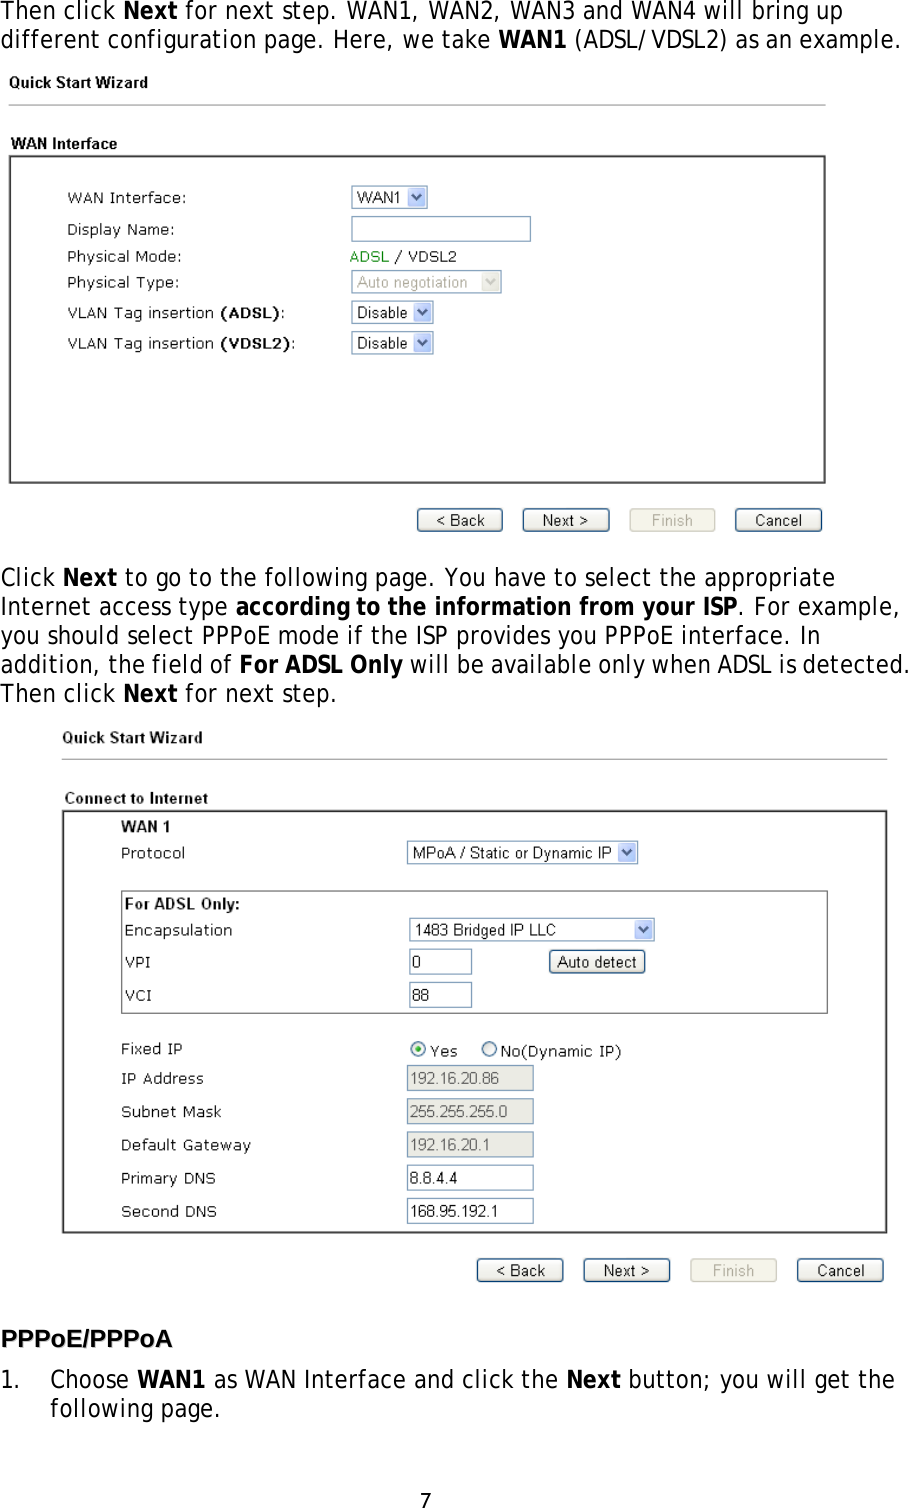 7 Then click Next for next step. WAN1, WAN2, WAN3 and WAN4 will bring up different configuration page. Here, we take WAN1 (ADSL/VDSL2) as an example. Click Next to go to the following page. You have to select the appropriate Internet access type according to the information from your ISP. For example, you should select PPPoE mode if the ISP provides you PPPoE interface. In addition, the field of For ADSL Only will be available only when ADSL is detected. Then click Next for next step. PPPPPPooEE//PPPPPPooAA  1. Choose WAN1 as WAN Interface and click the Next button; you will get thefollowing page.